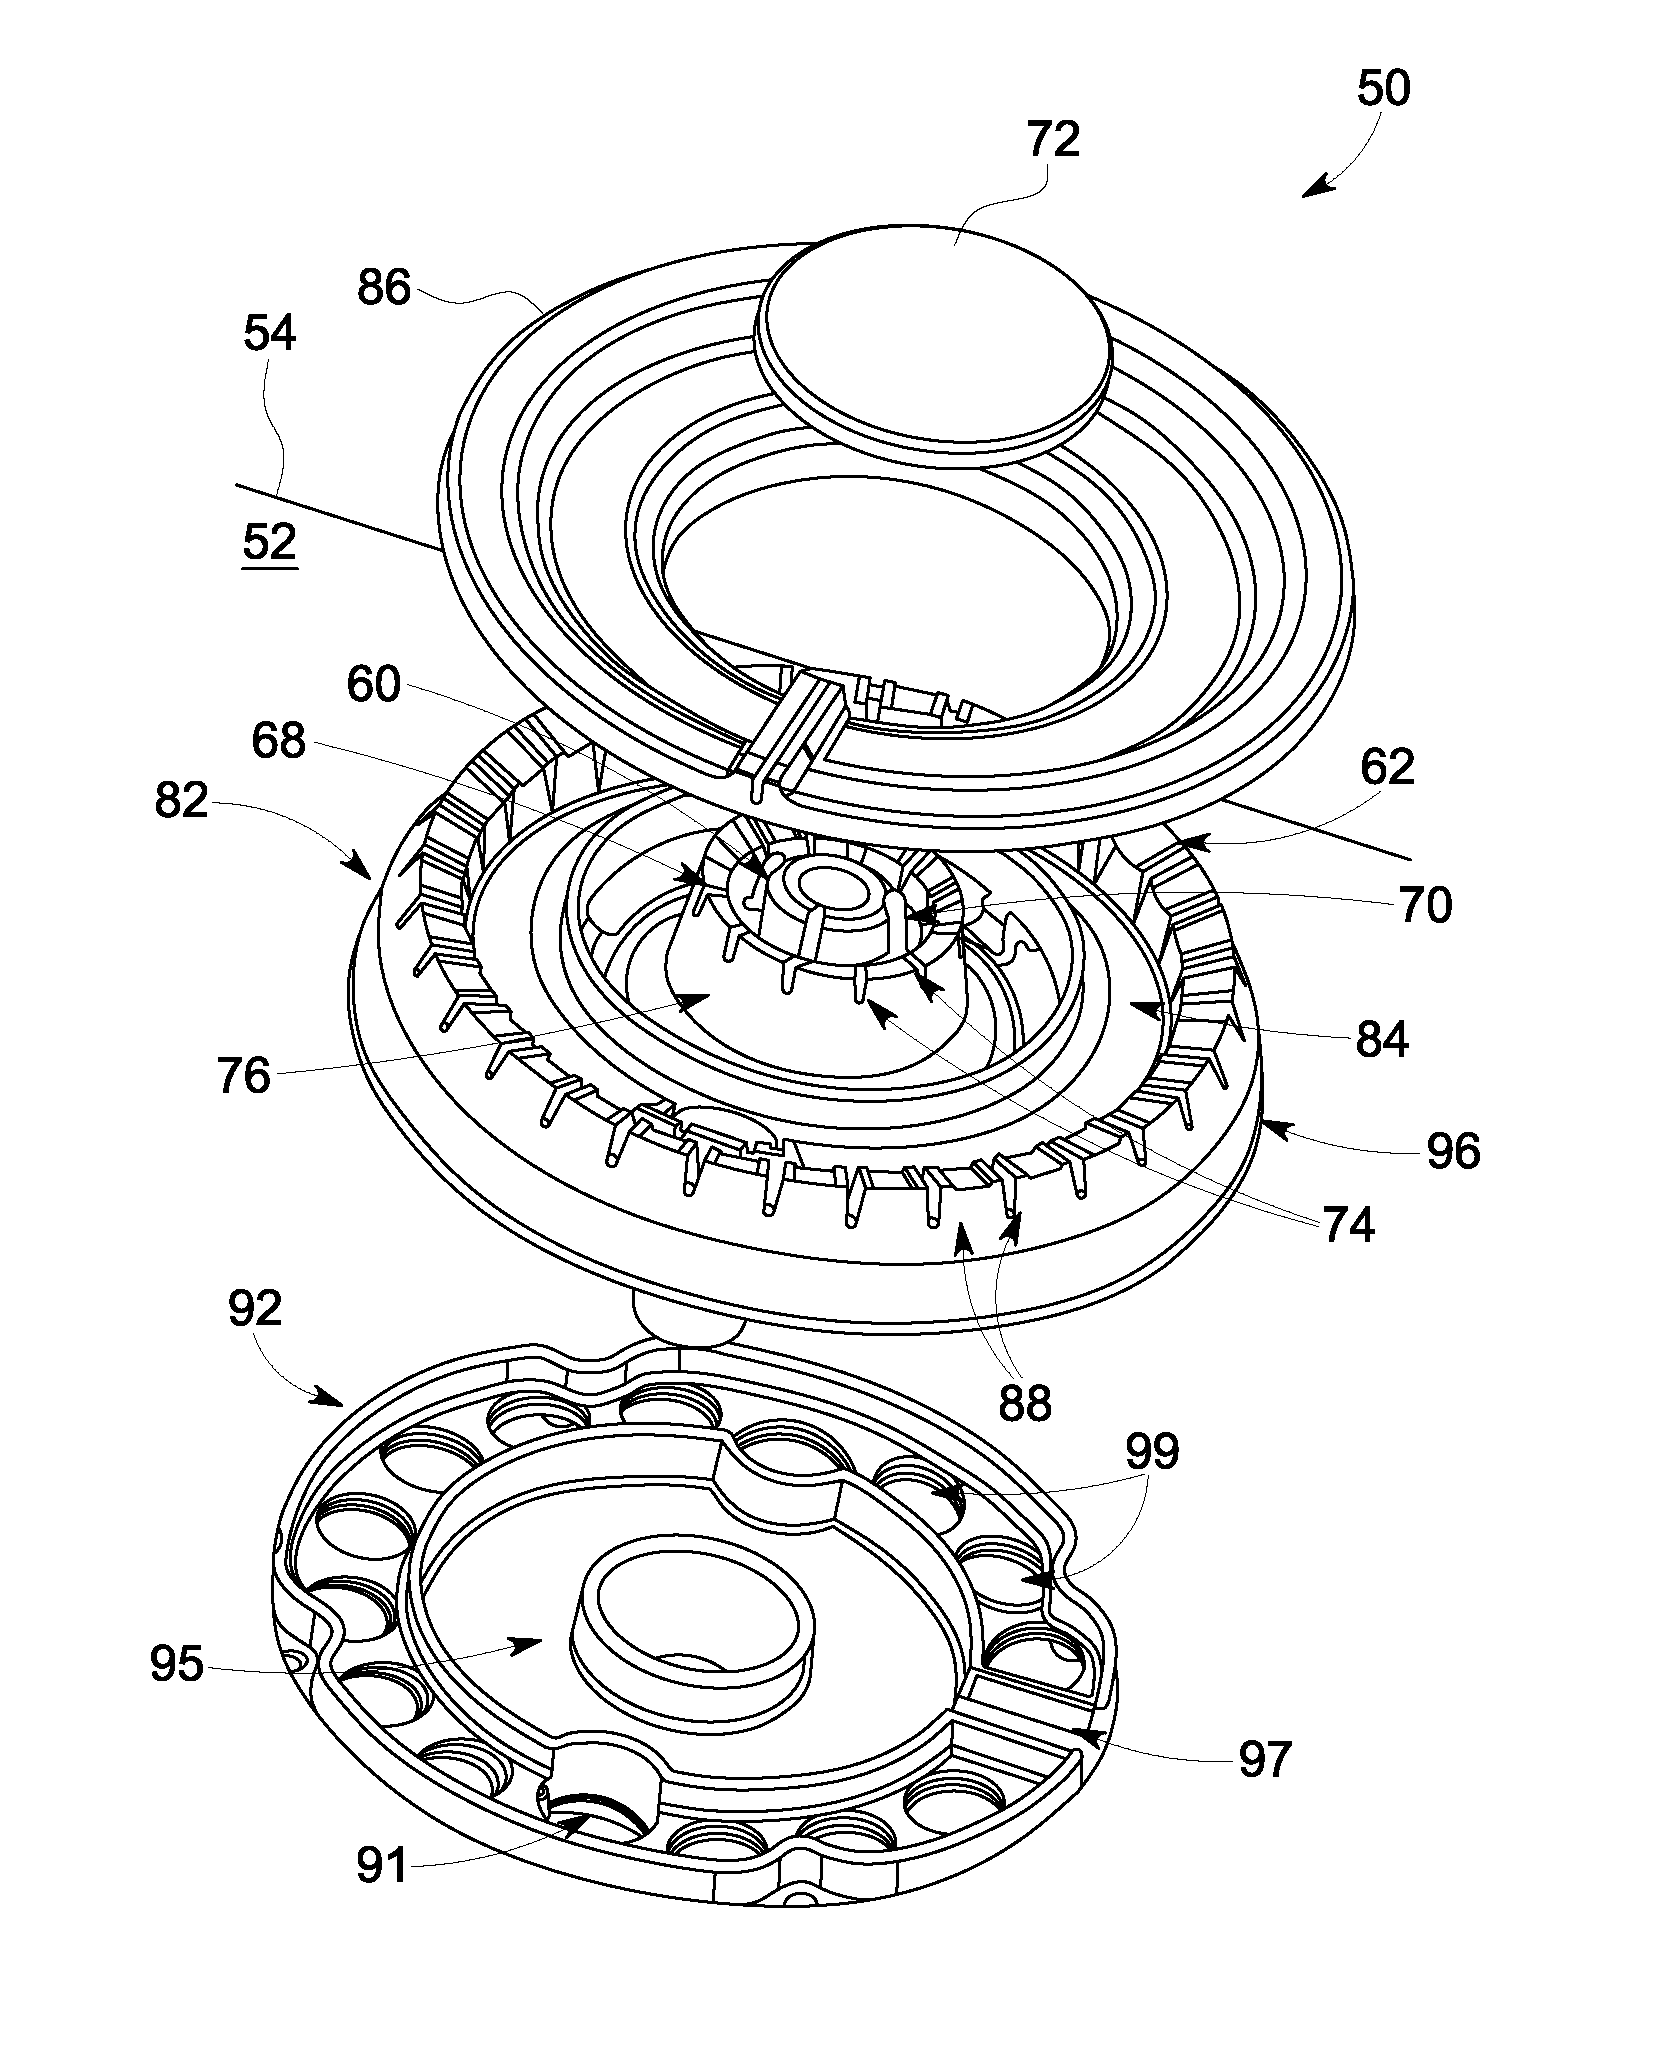 Multi-ringed burner with spill containment